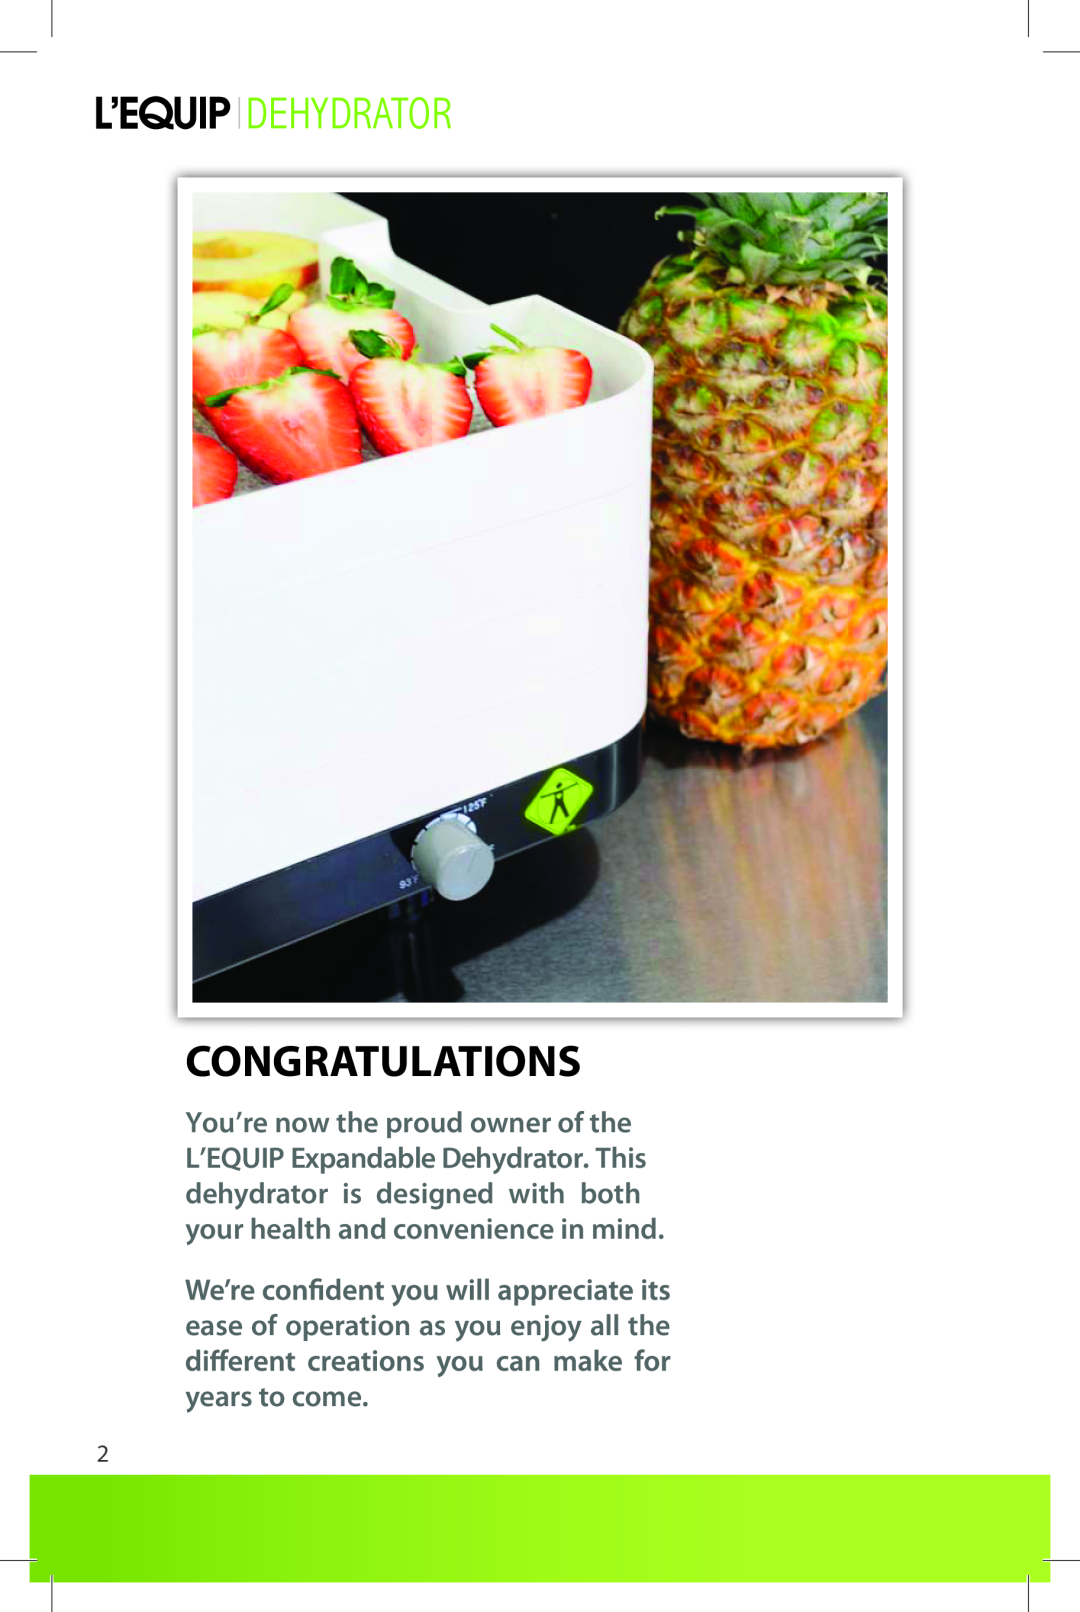 L'Equip 528, 524 manual Dehydrator, Congratulations, ease of operation as you enjoy all the years to come 